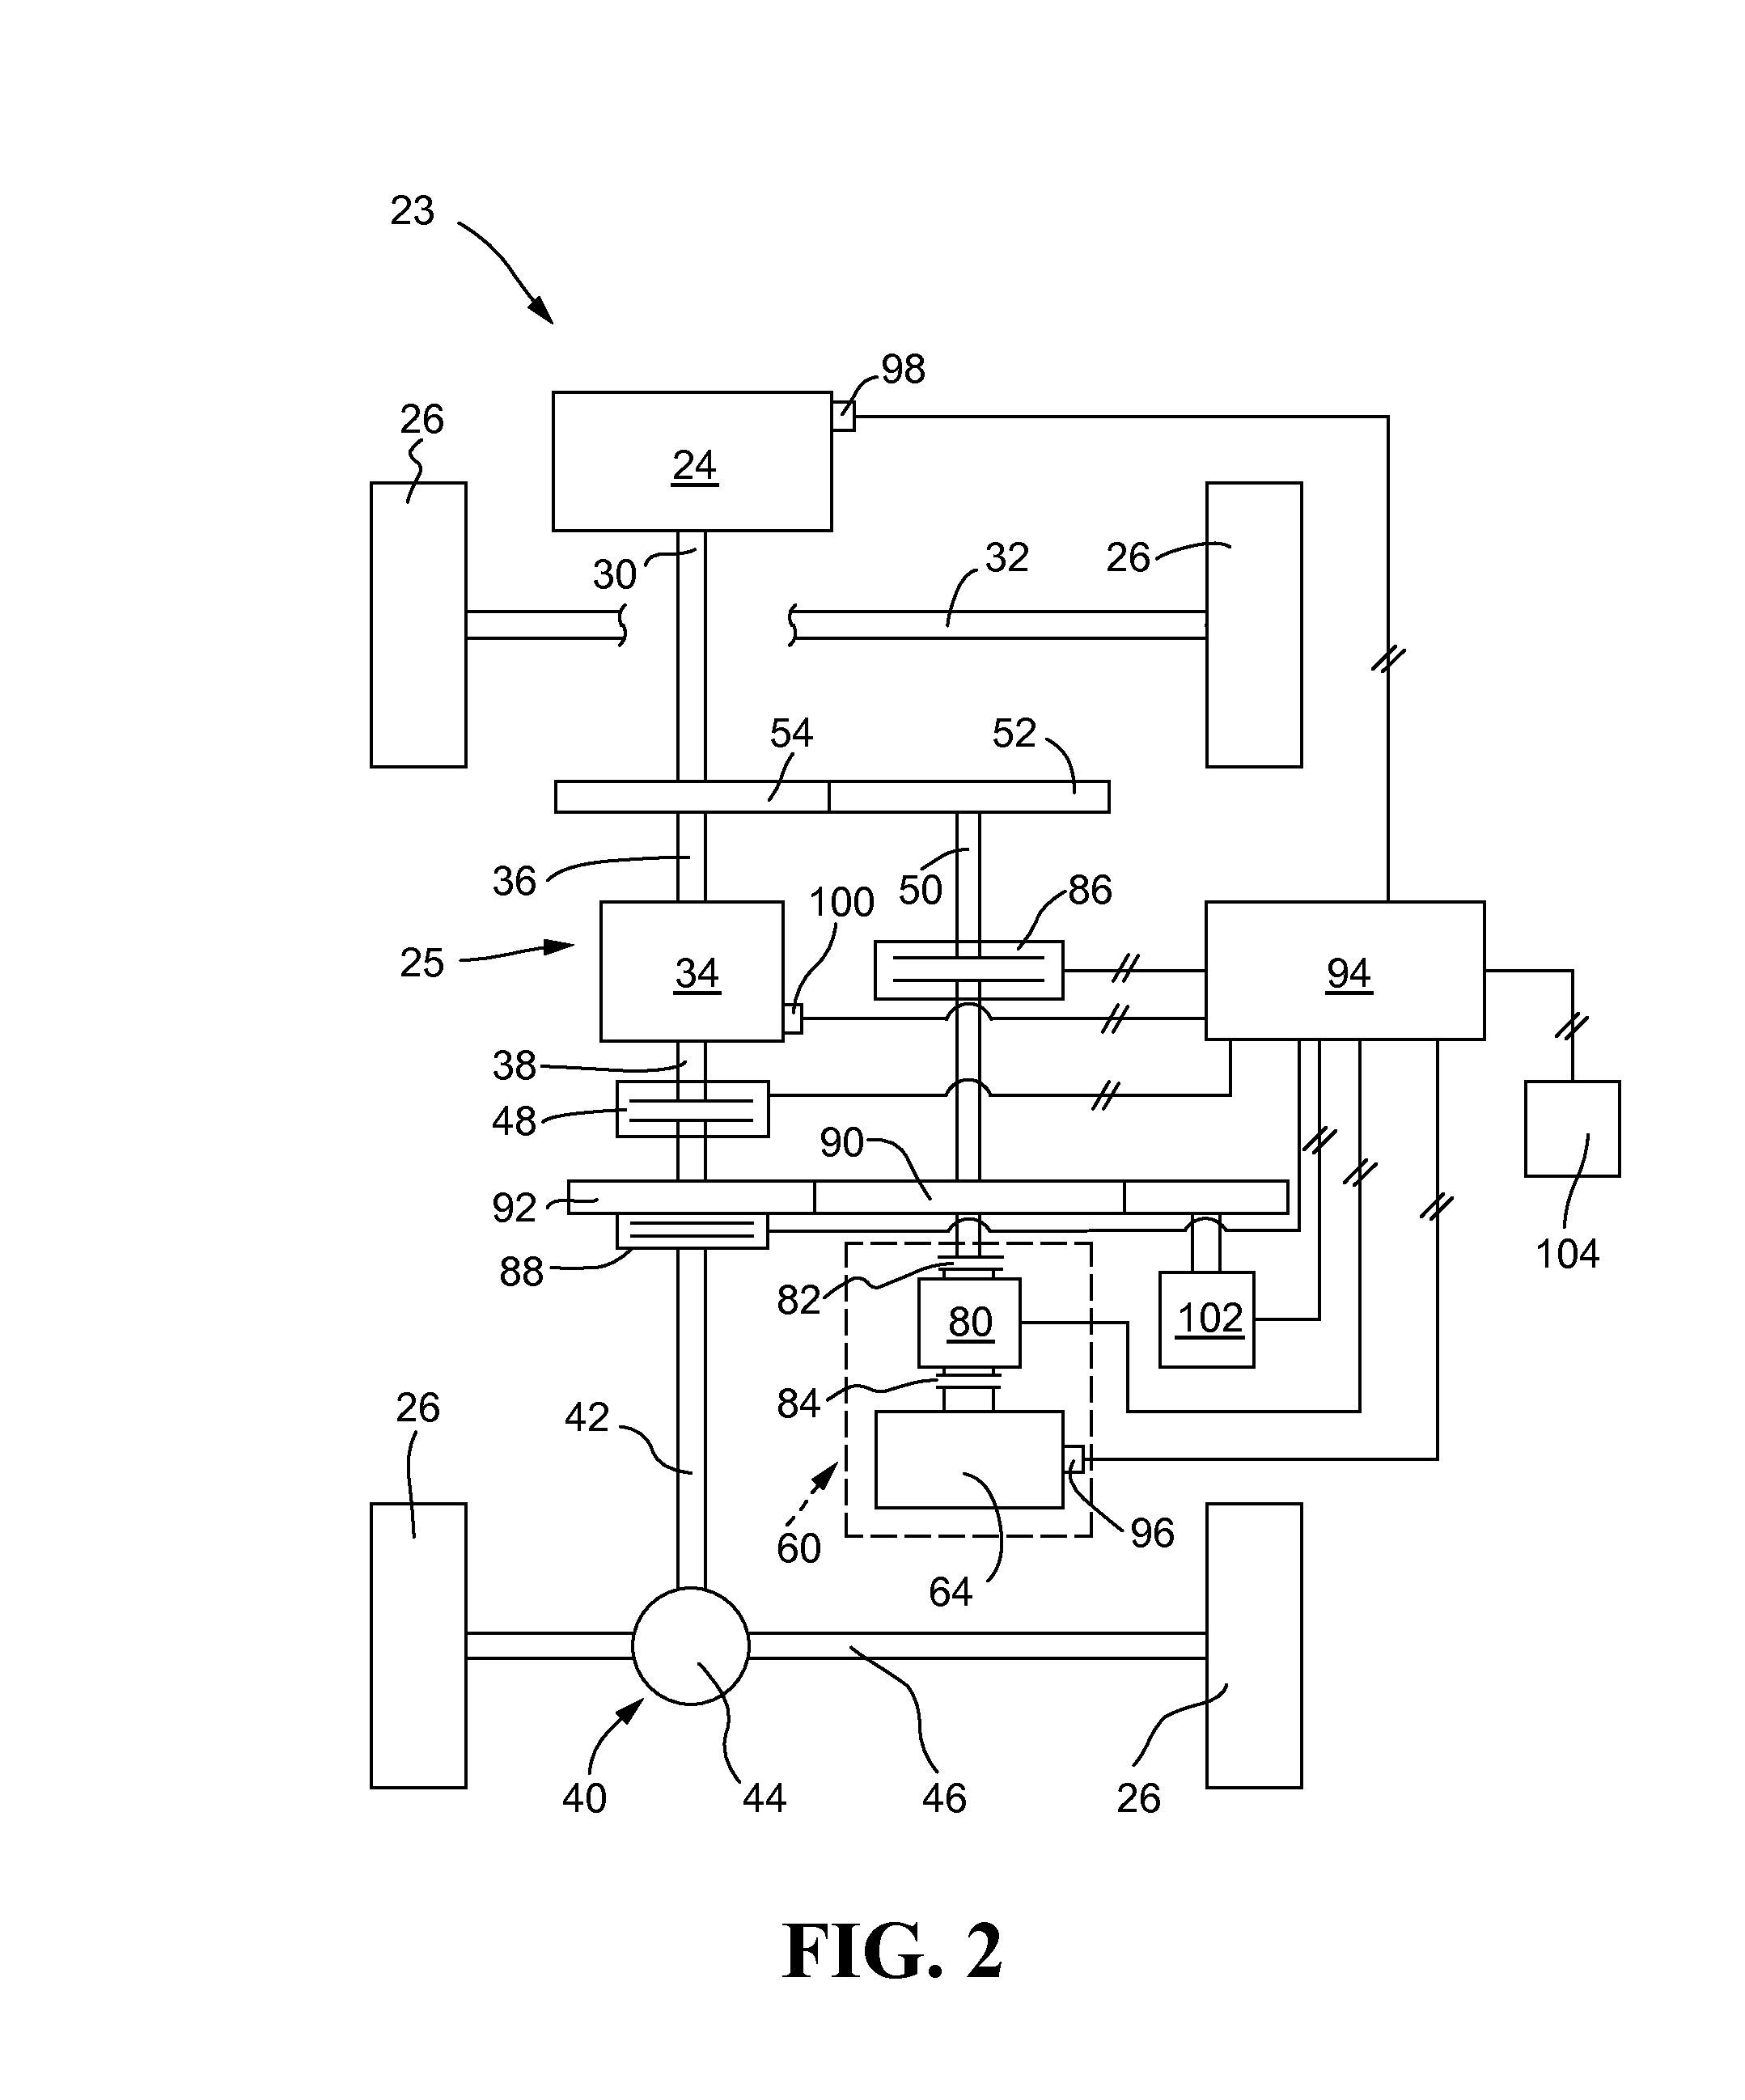 System and Method for Efficiently Operating Multiple Flywheels